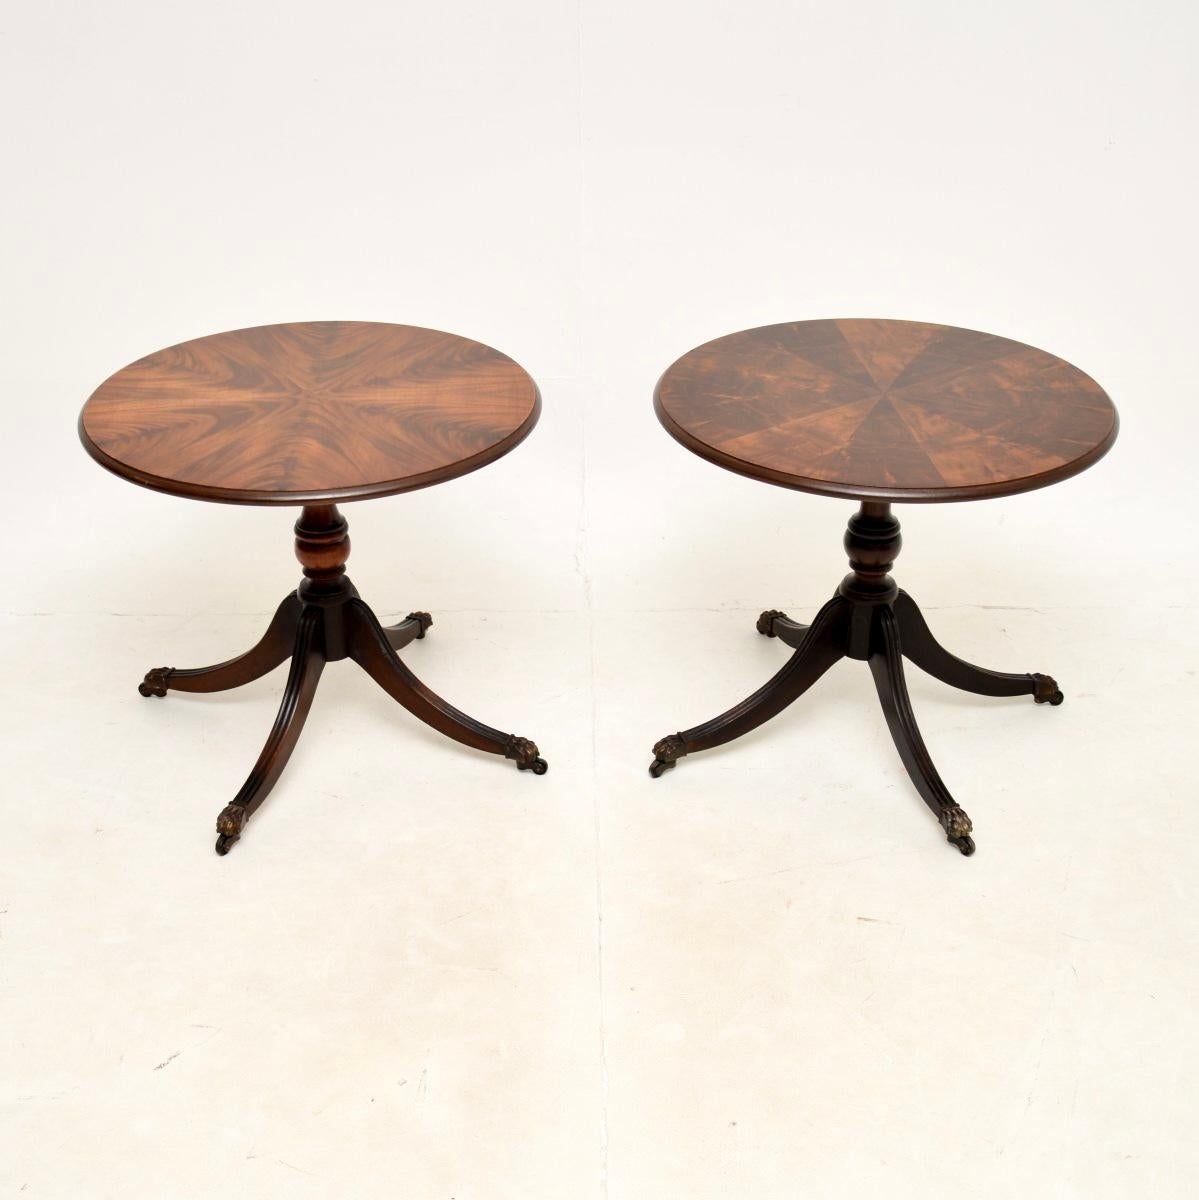 A beautiful pair of antique Regency style side tables. They were made in England, they date from around the 1950’s.

The quality is fantastic, they are a useful size and have a lovely design. The circular tops have gorgeous colours and grain